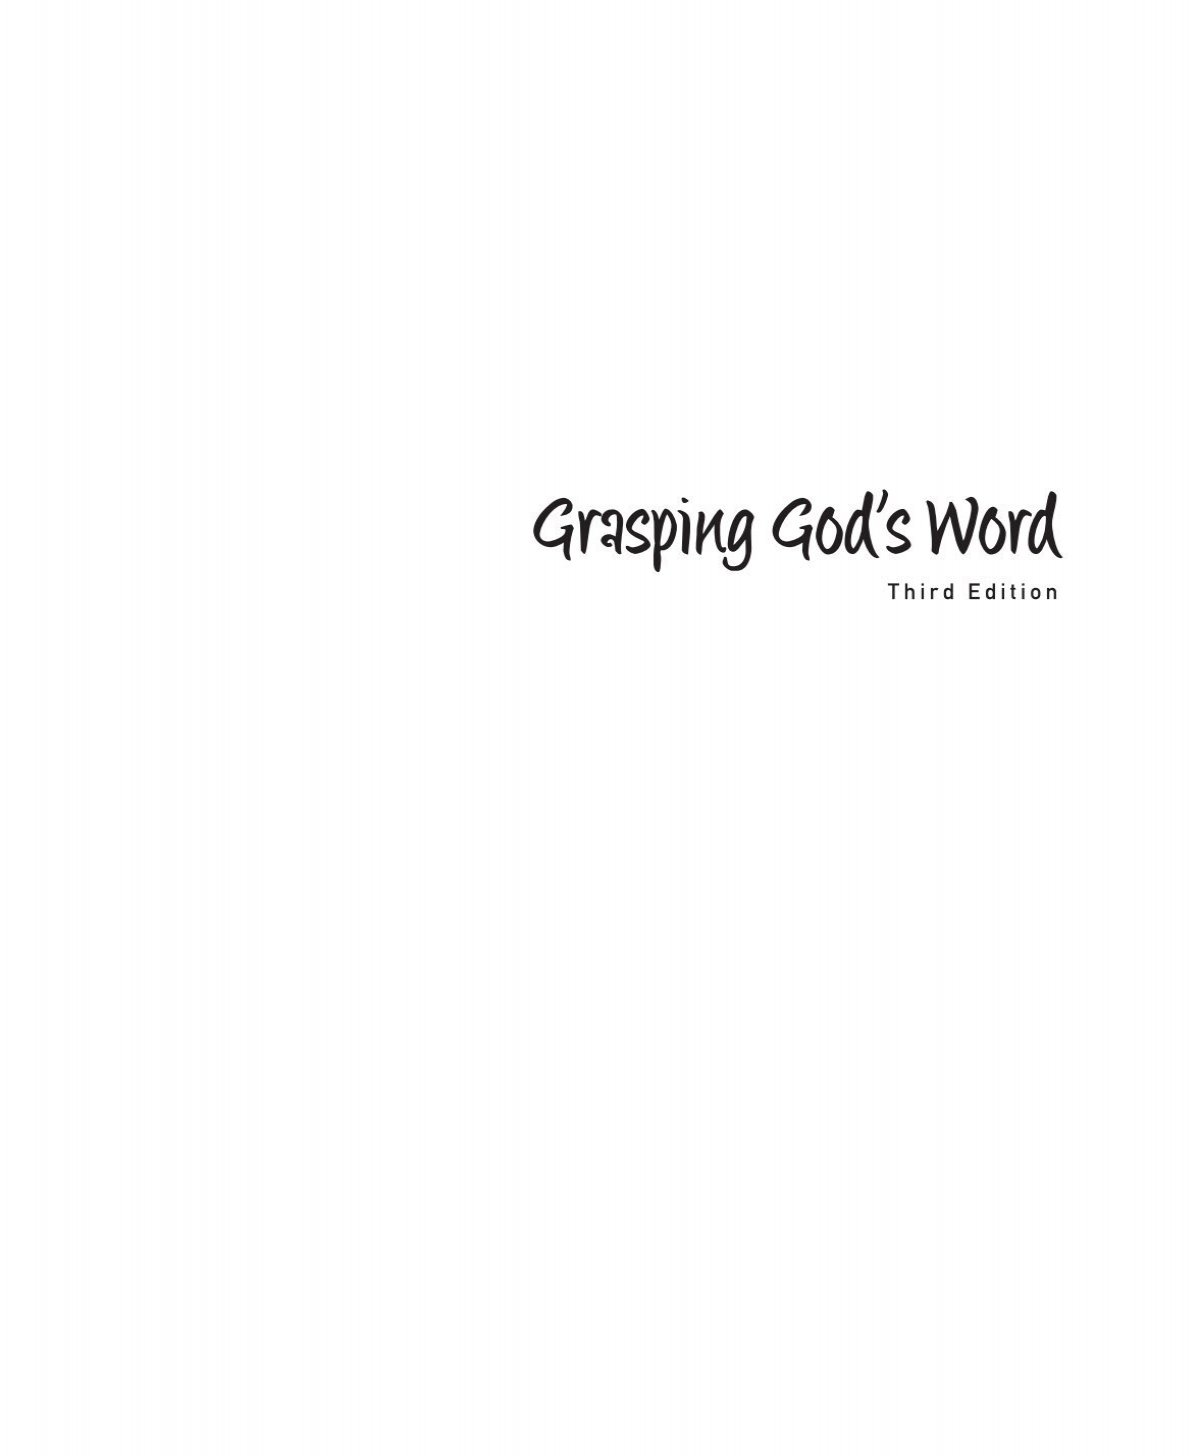 grasping god's word assignment 3 1